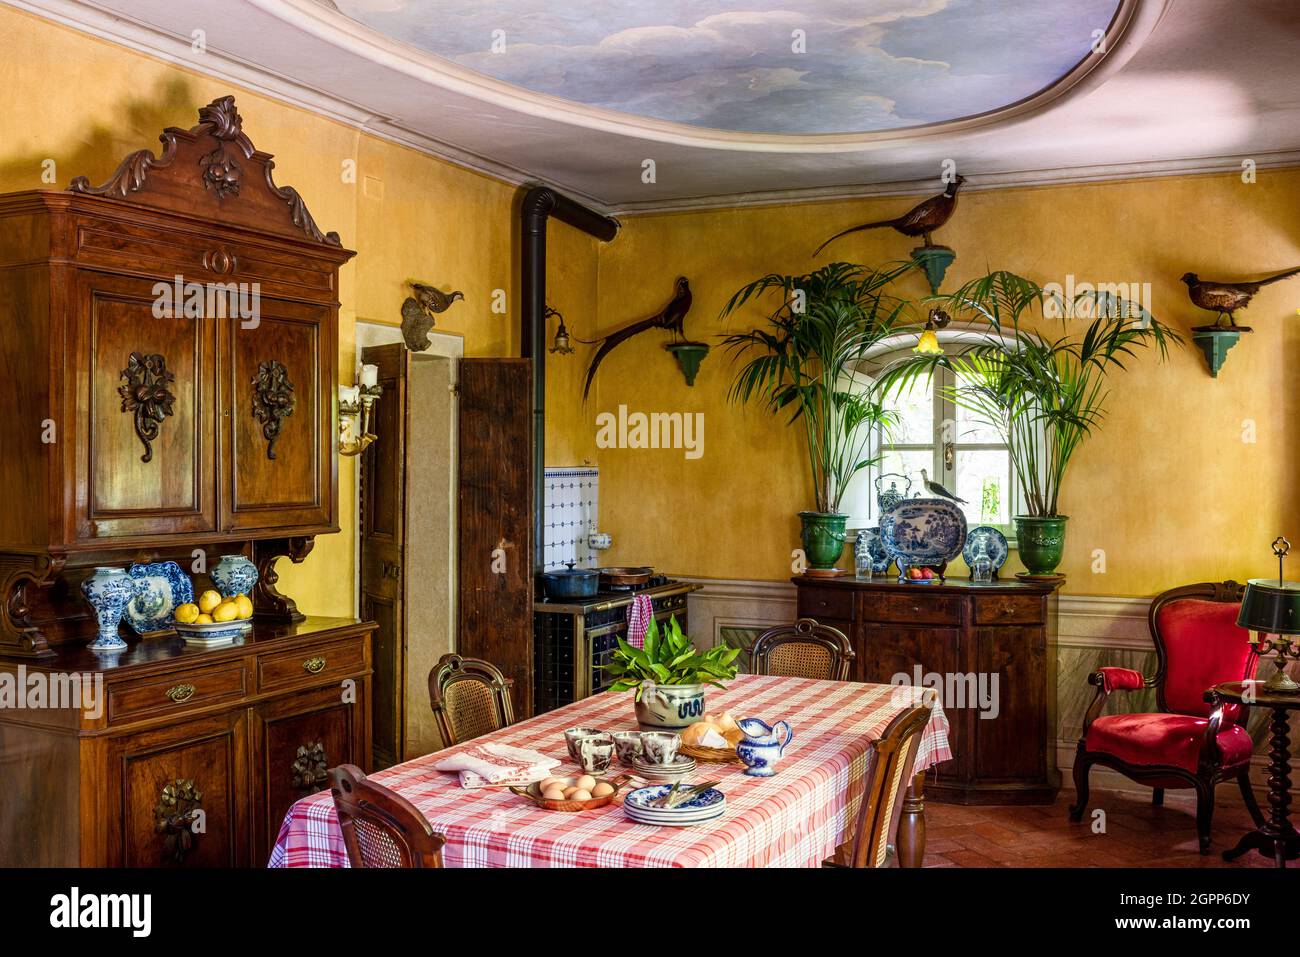 Peacock ornaments and wooden dresser with trompe l'oeil ceiling decoration in Lake Garda. Stock Photo